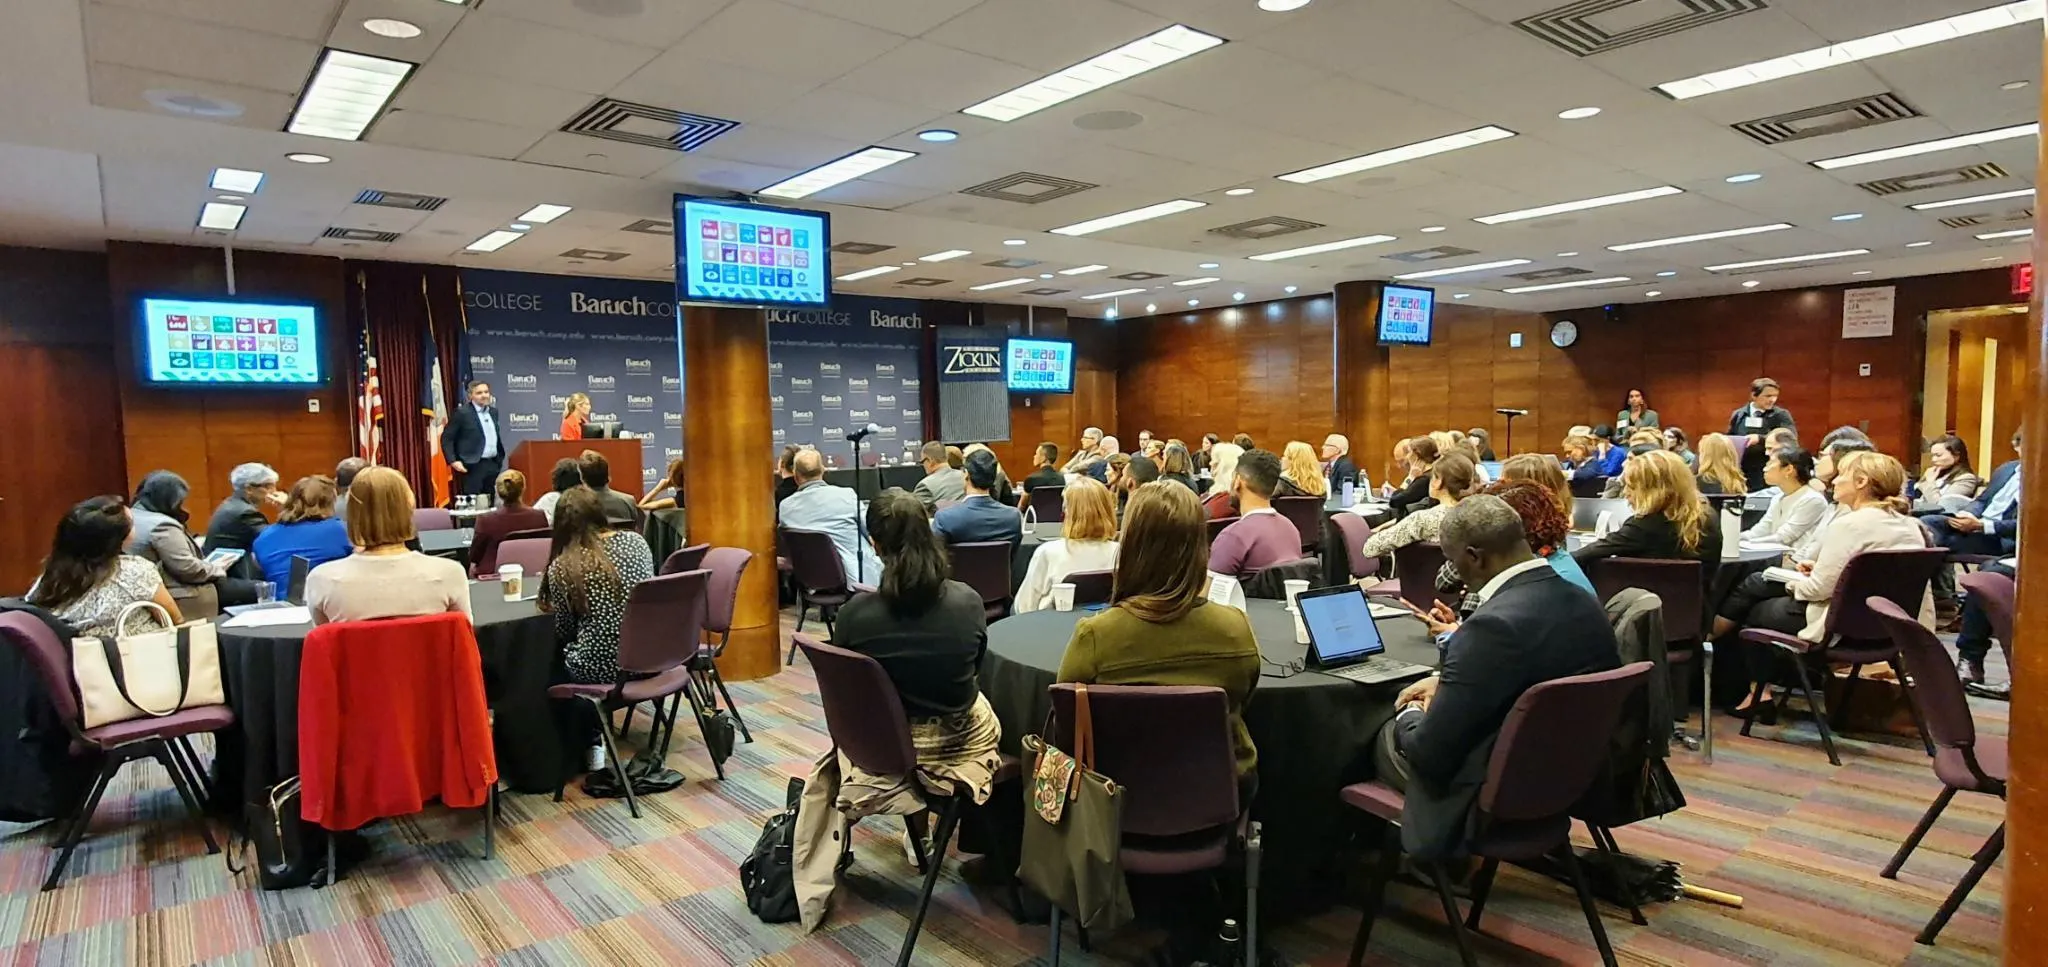 The event, organised in partnership with the Global Reporting Initiative took place as an official 'sideline' event to the 78th meeting of the United Nations General Assembly in New York.